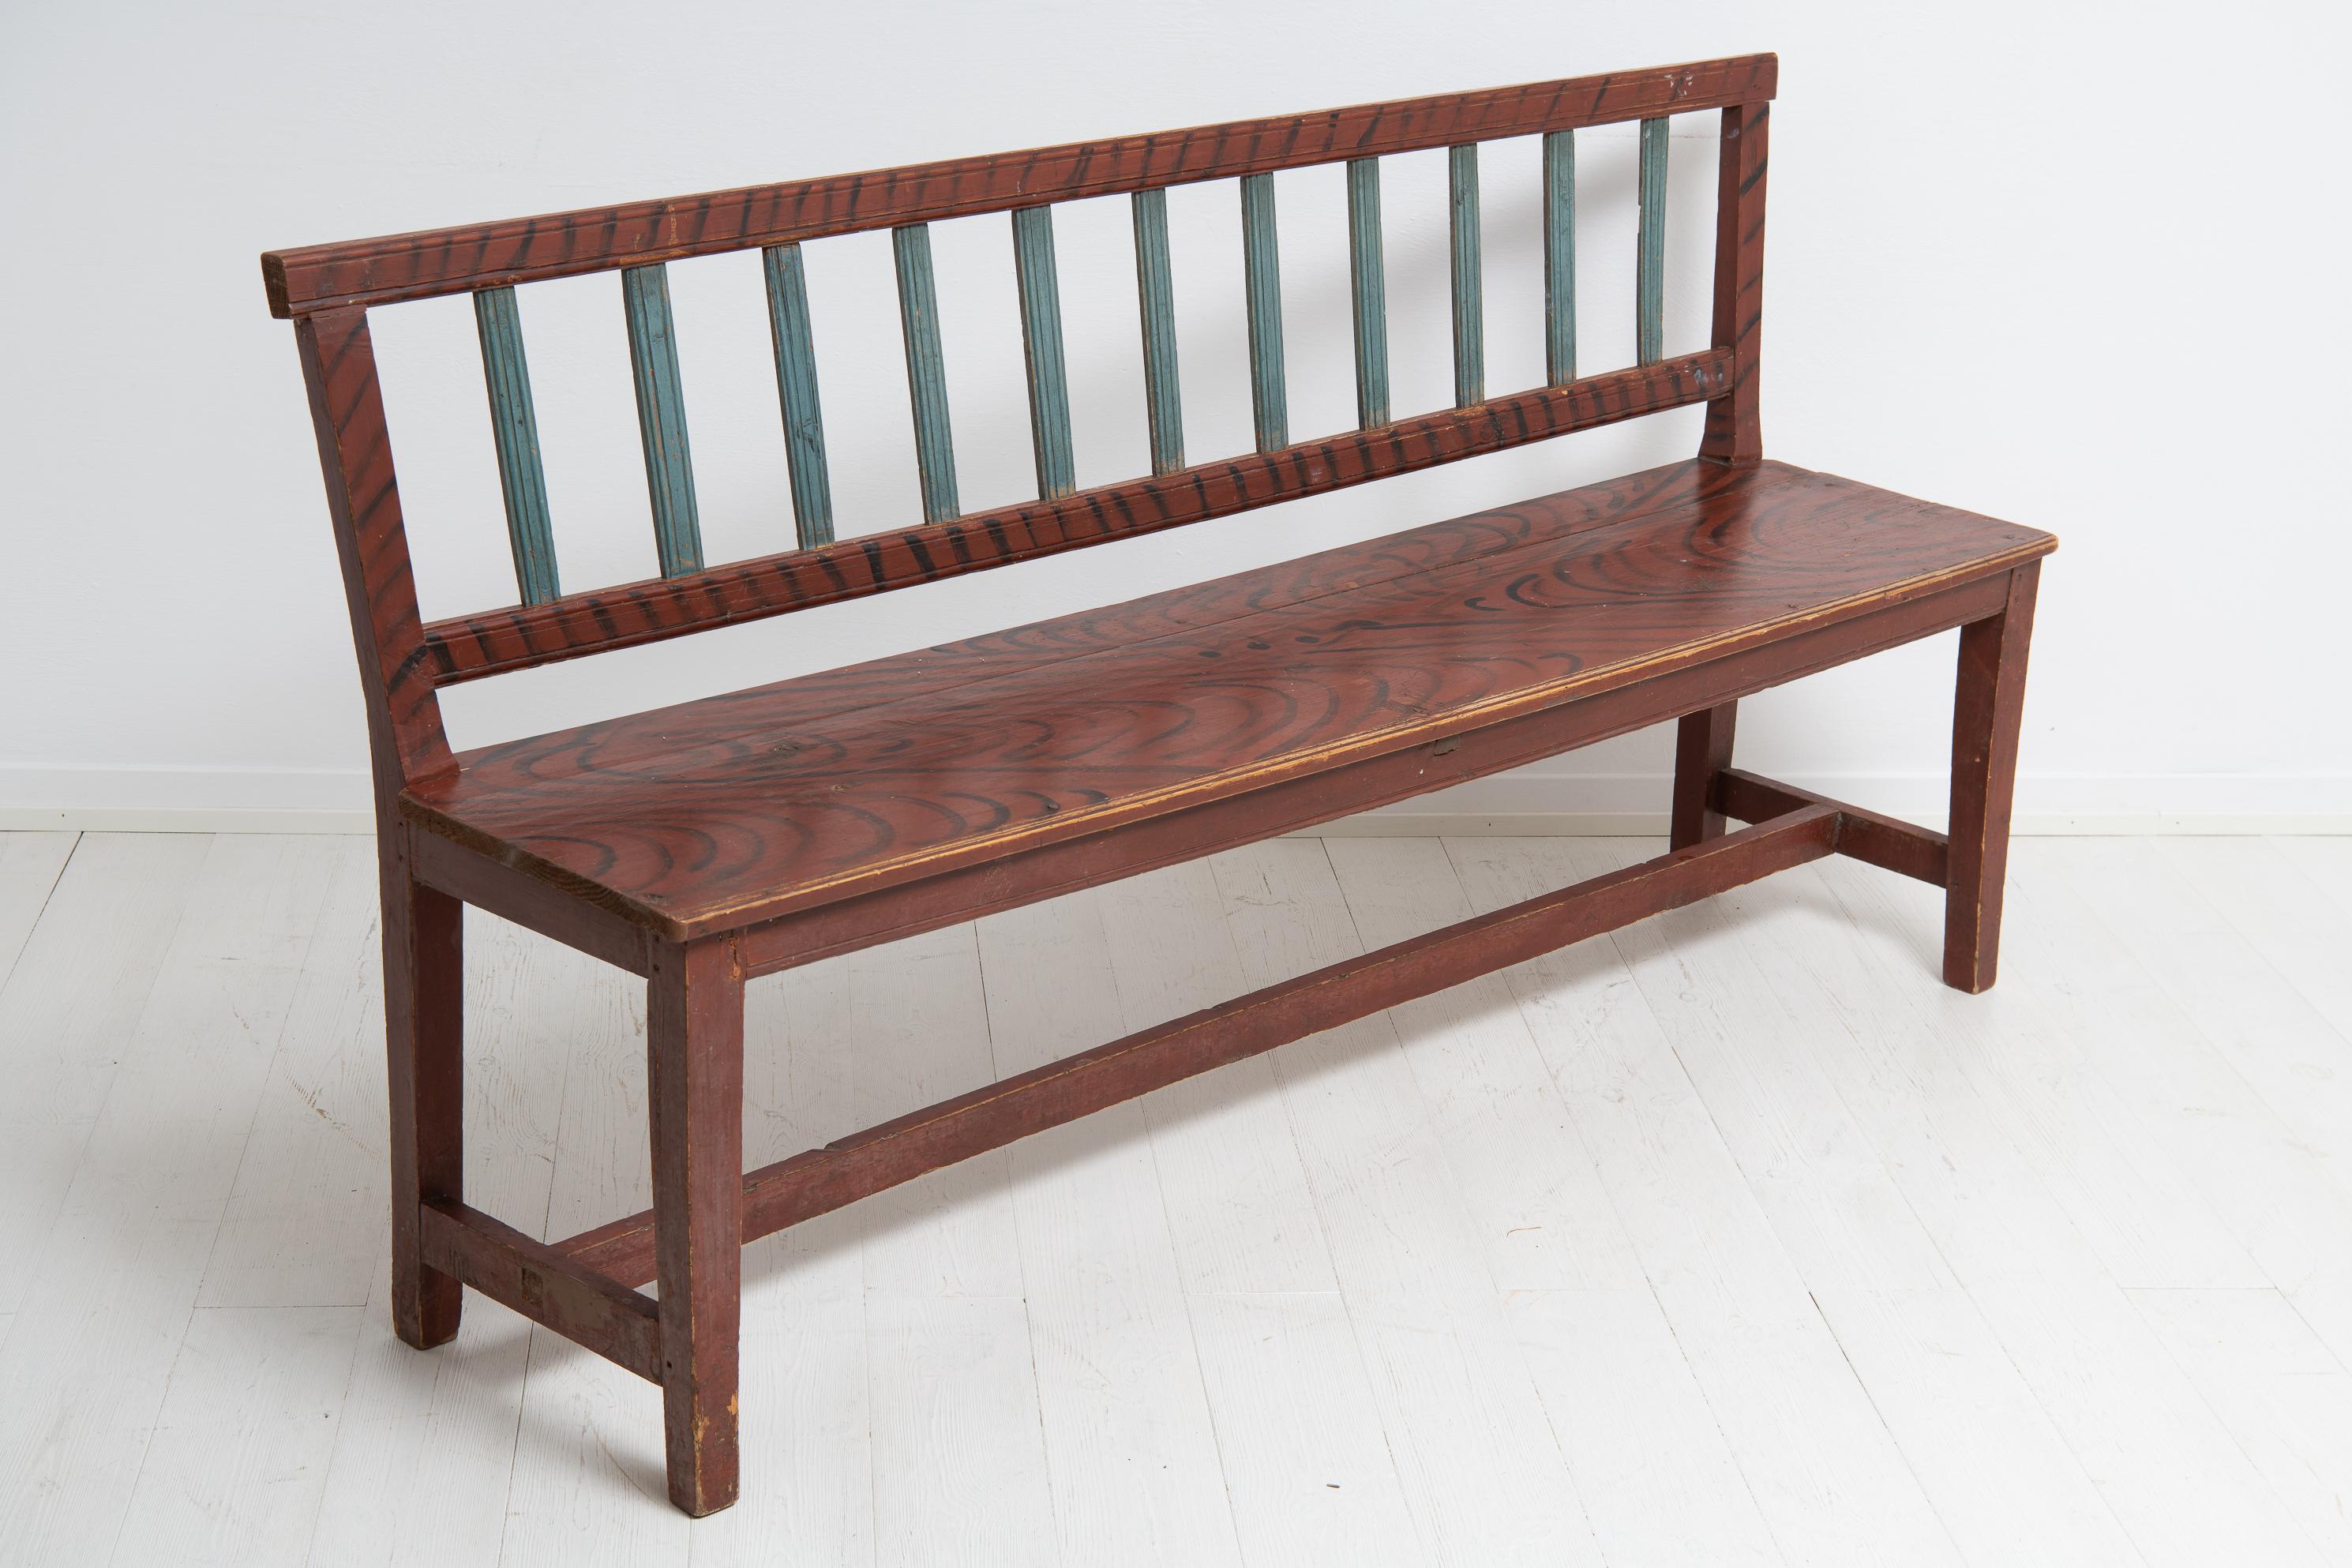 Early 19th Century Swedish Gustavian Folk Art Country Sofa or Bench For Sale 1